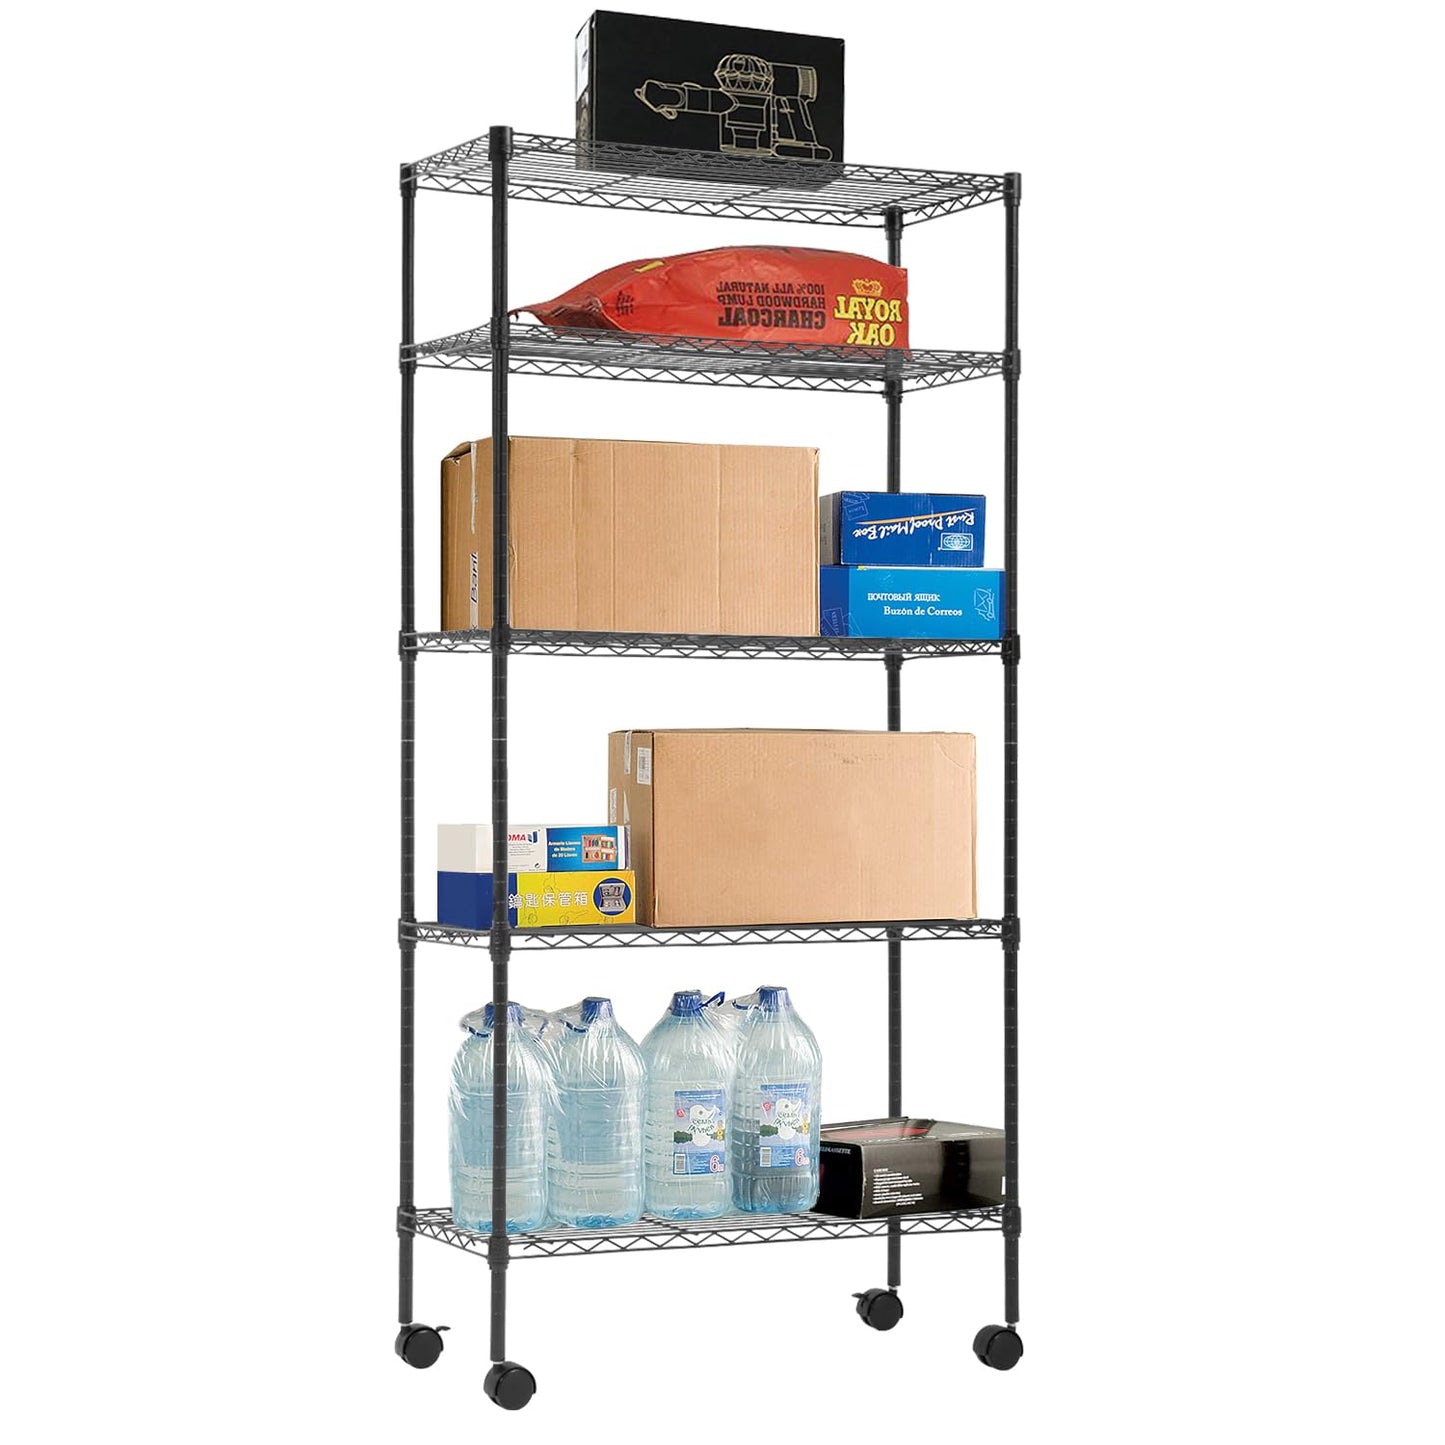 14"x30"x60" Commercial Storage Shelves Heavy Duty Shelving 5 Tier Layer Wire Shelving Unit with Wheels Metal Wire Shelf Standing Garage Shelves